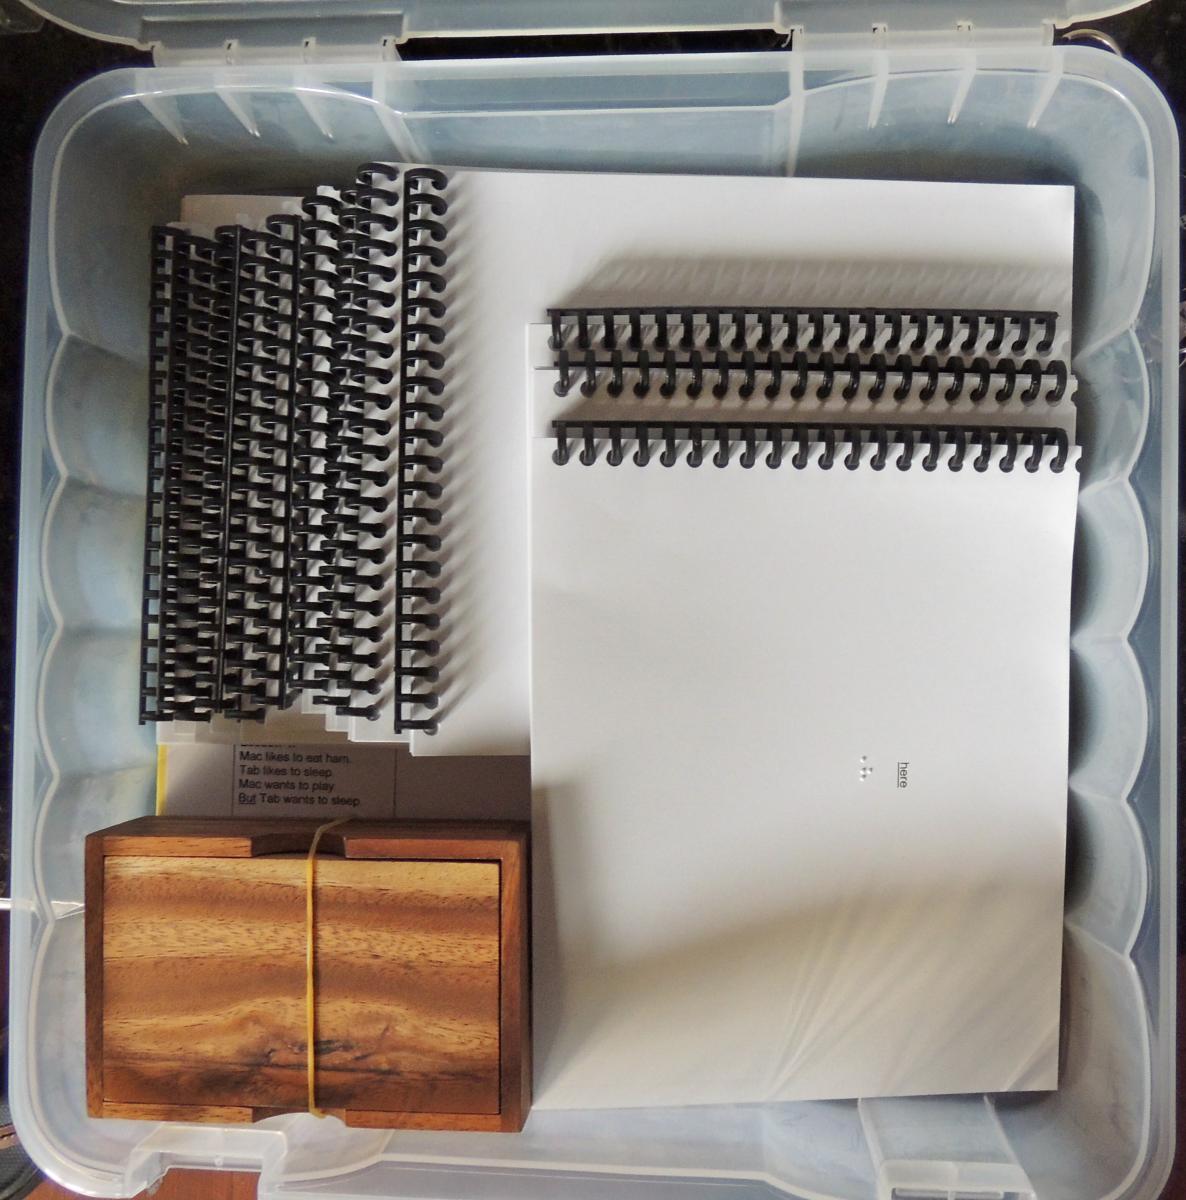 container containing all 13 brailled practice reading books, braille paper, braille production assignments, and the wooden box with 2 braille cells